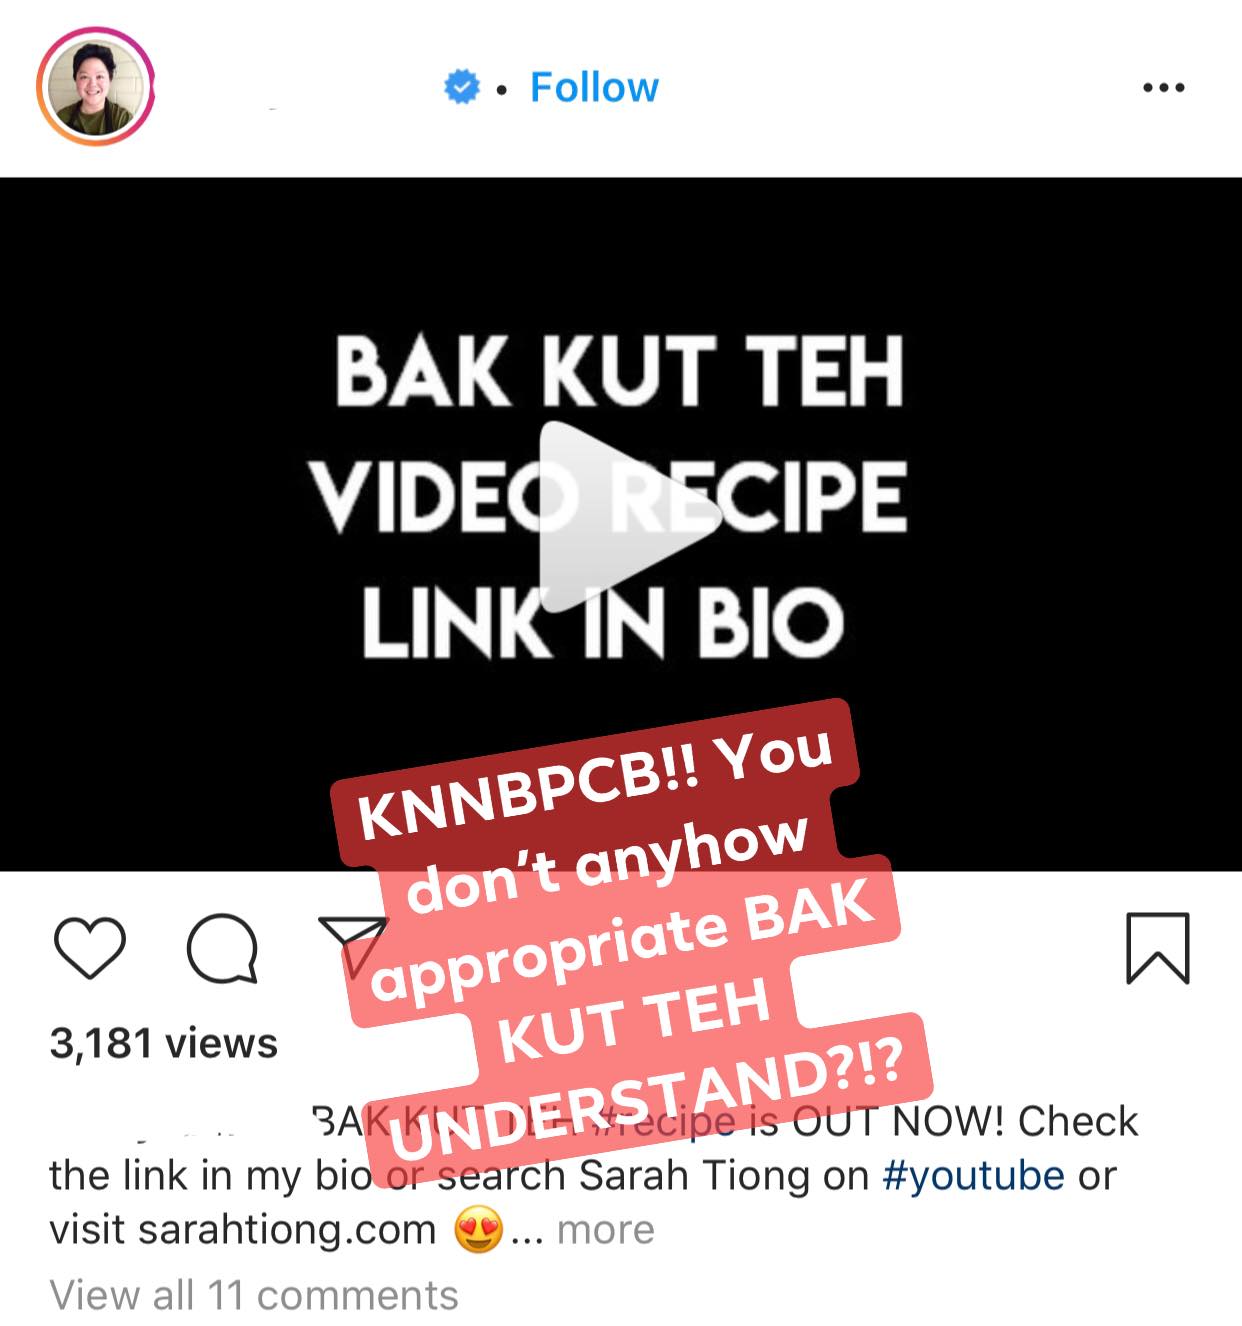 Sarah Tiong is possibly a racial hypocrite, with proof by OnHand Agrarian